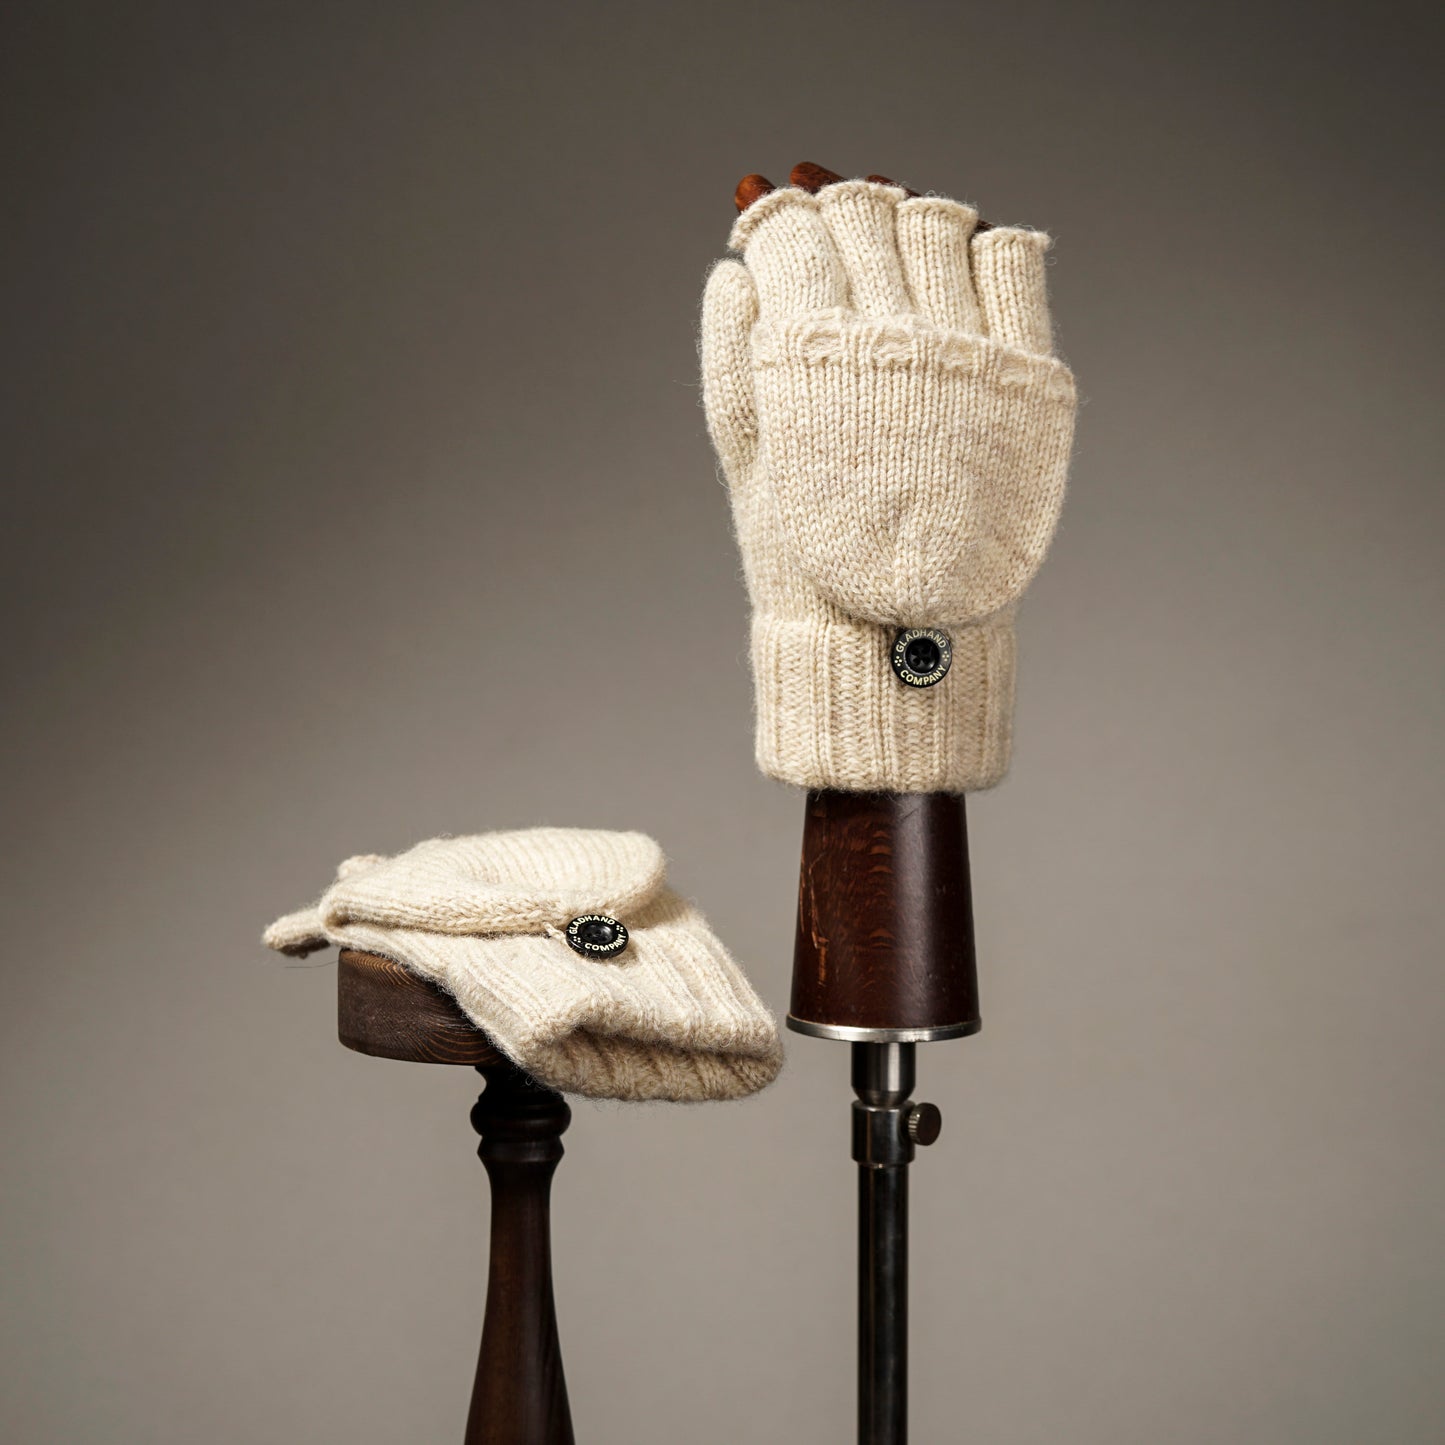 COUNTRY GENT - HALF FINGERS GLOVE WITH ADJUSTABLE FLAPS / BYGH-22-AW-G06